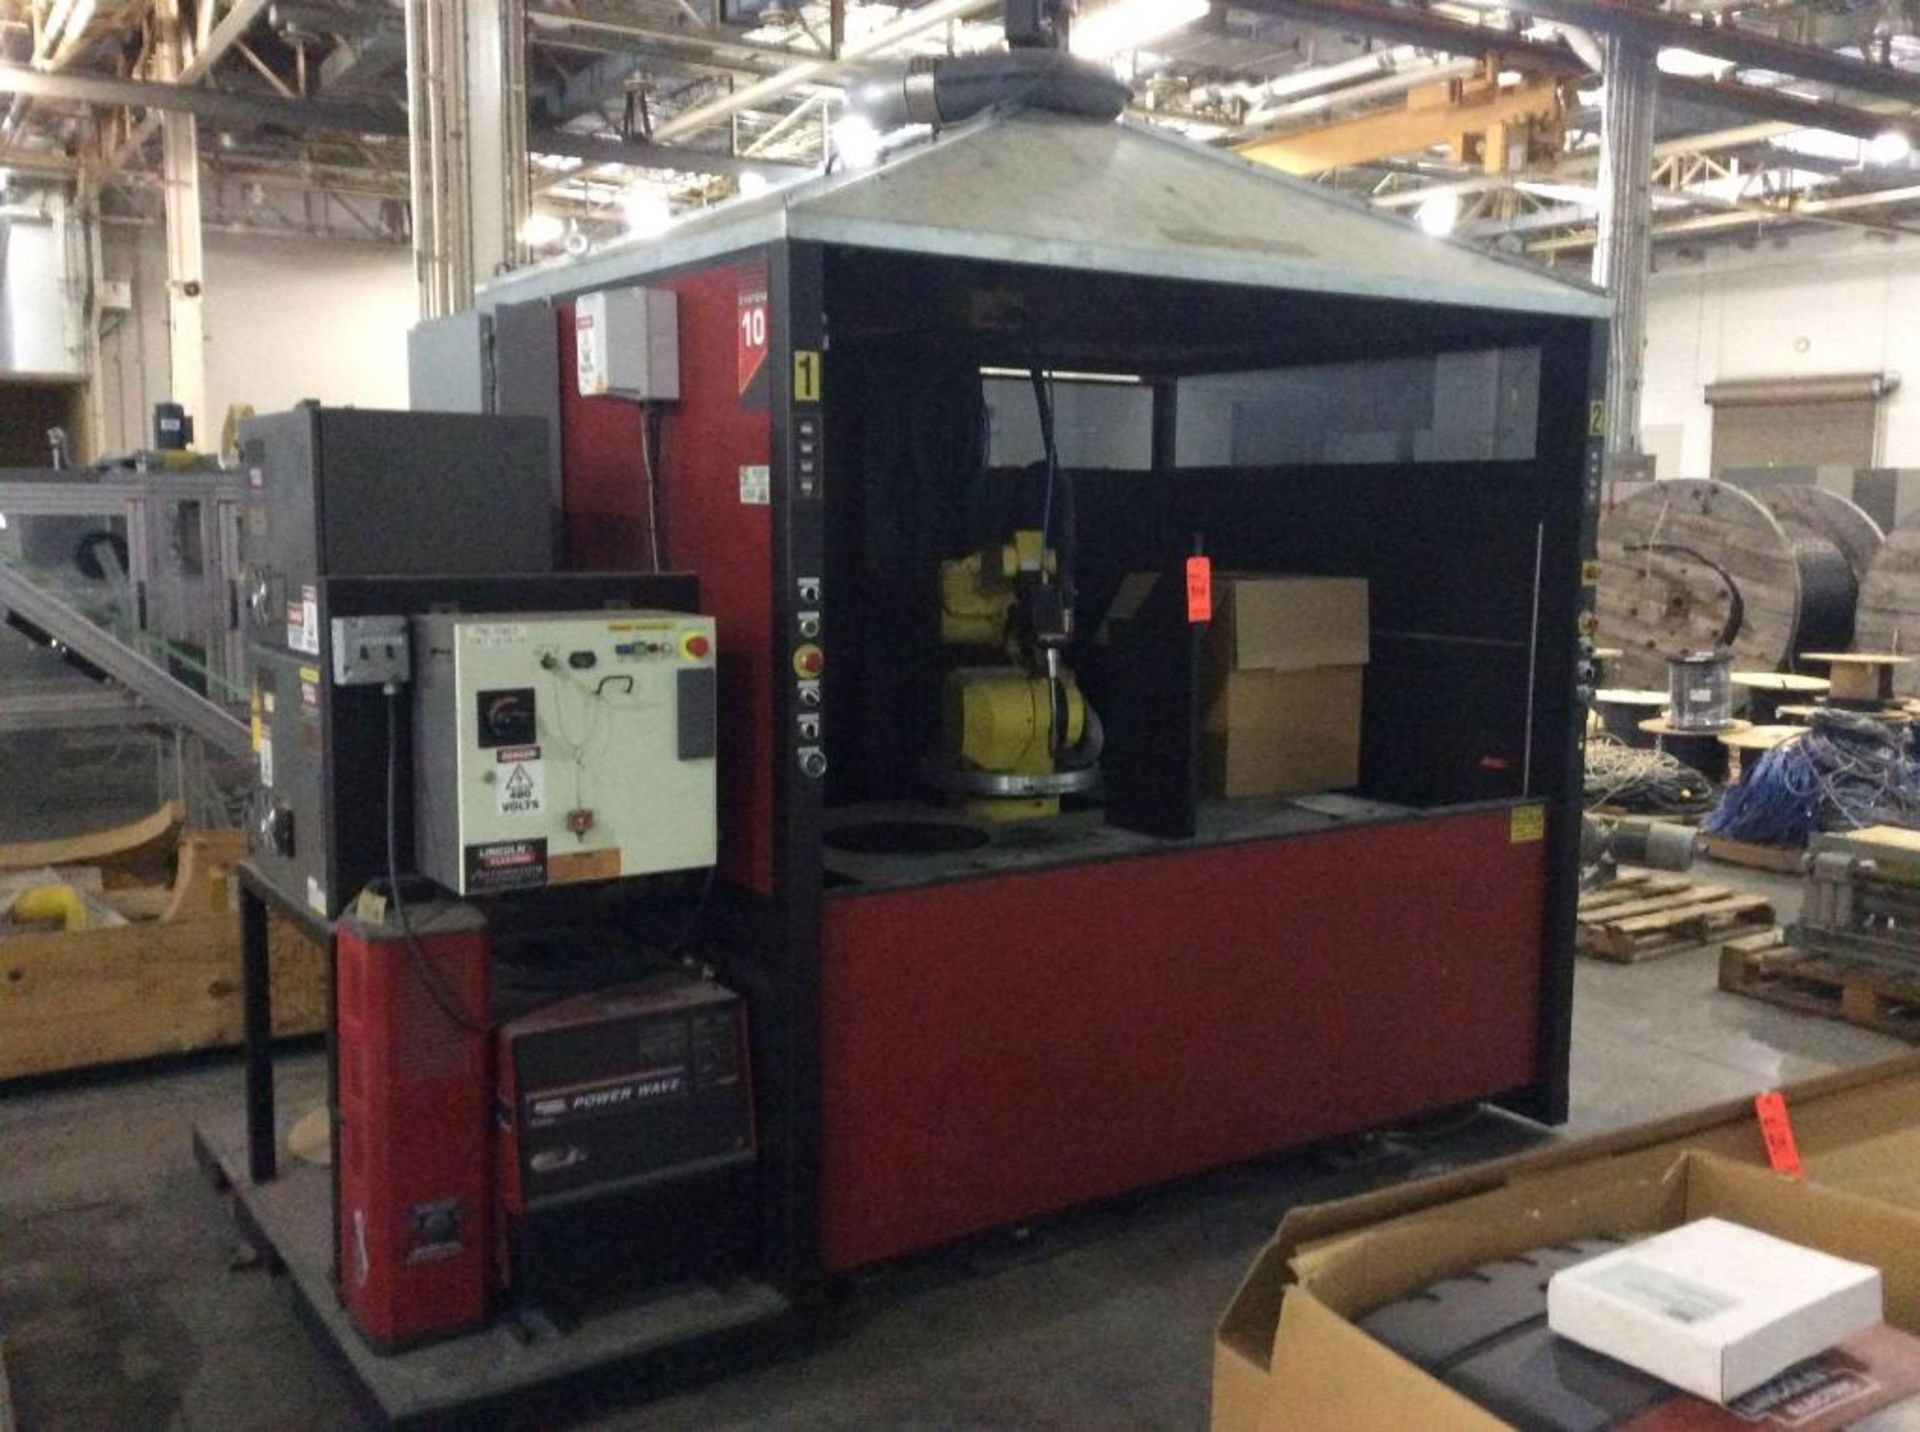 Robotic welder including Fanuc robot ARC MATE 100IBE and Lincoln 8' x 6' x approx 11' high enclosure